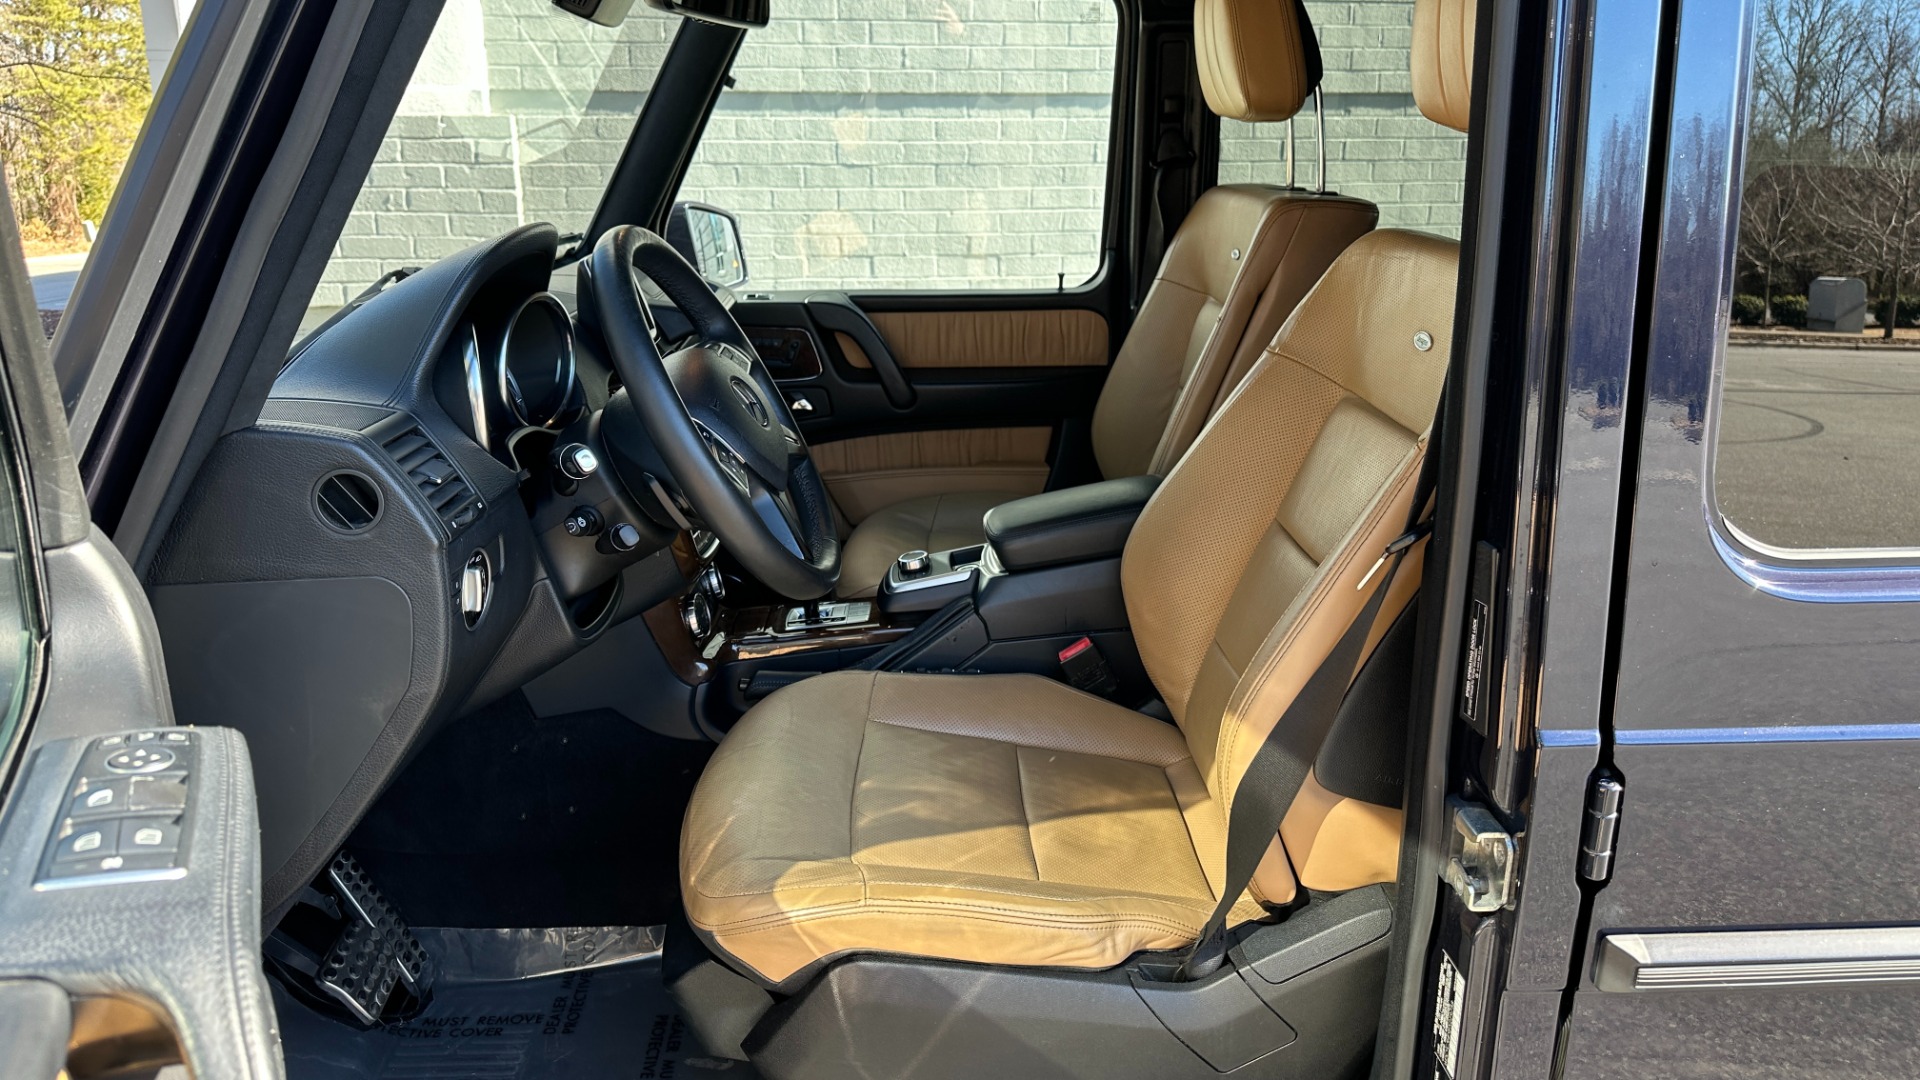 Used 2015 Mercedes-Benz G-Class G550 / DESIGNO NAPPA LEATHER / DESIGNO HEADLINER / HEATED STEERING / NAV /  for sale Sold at Formula Imports in Charlotte NC 28227 13